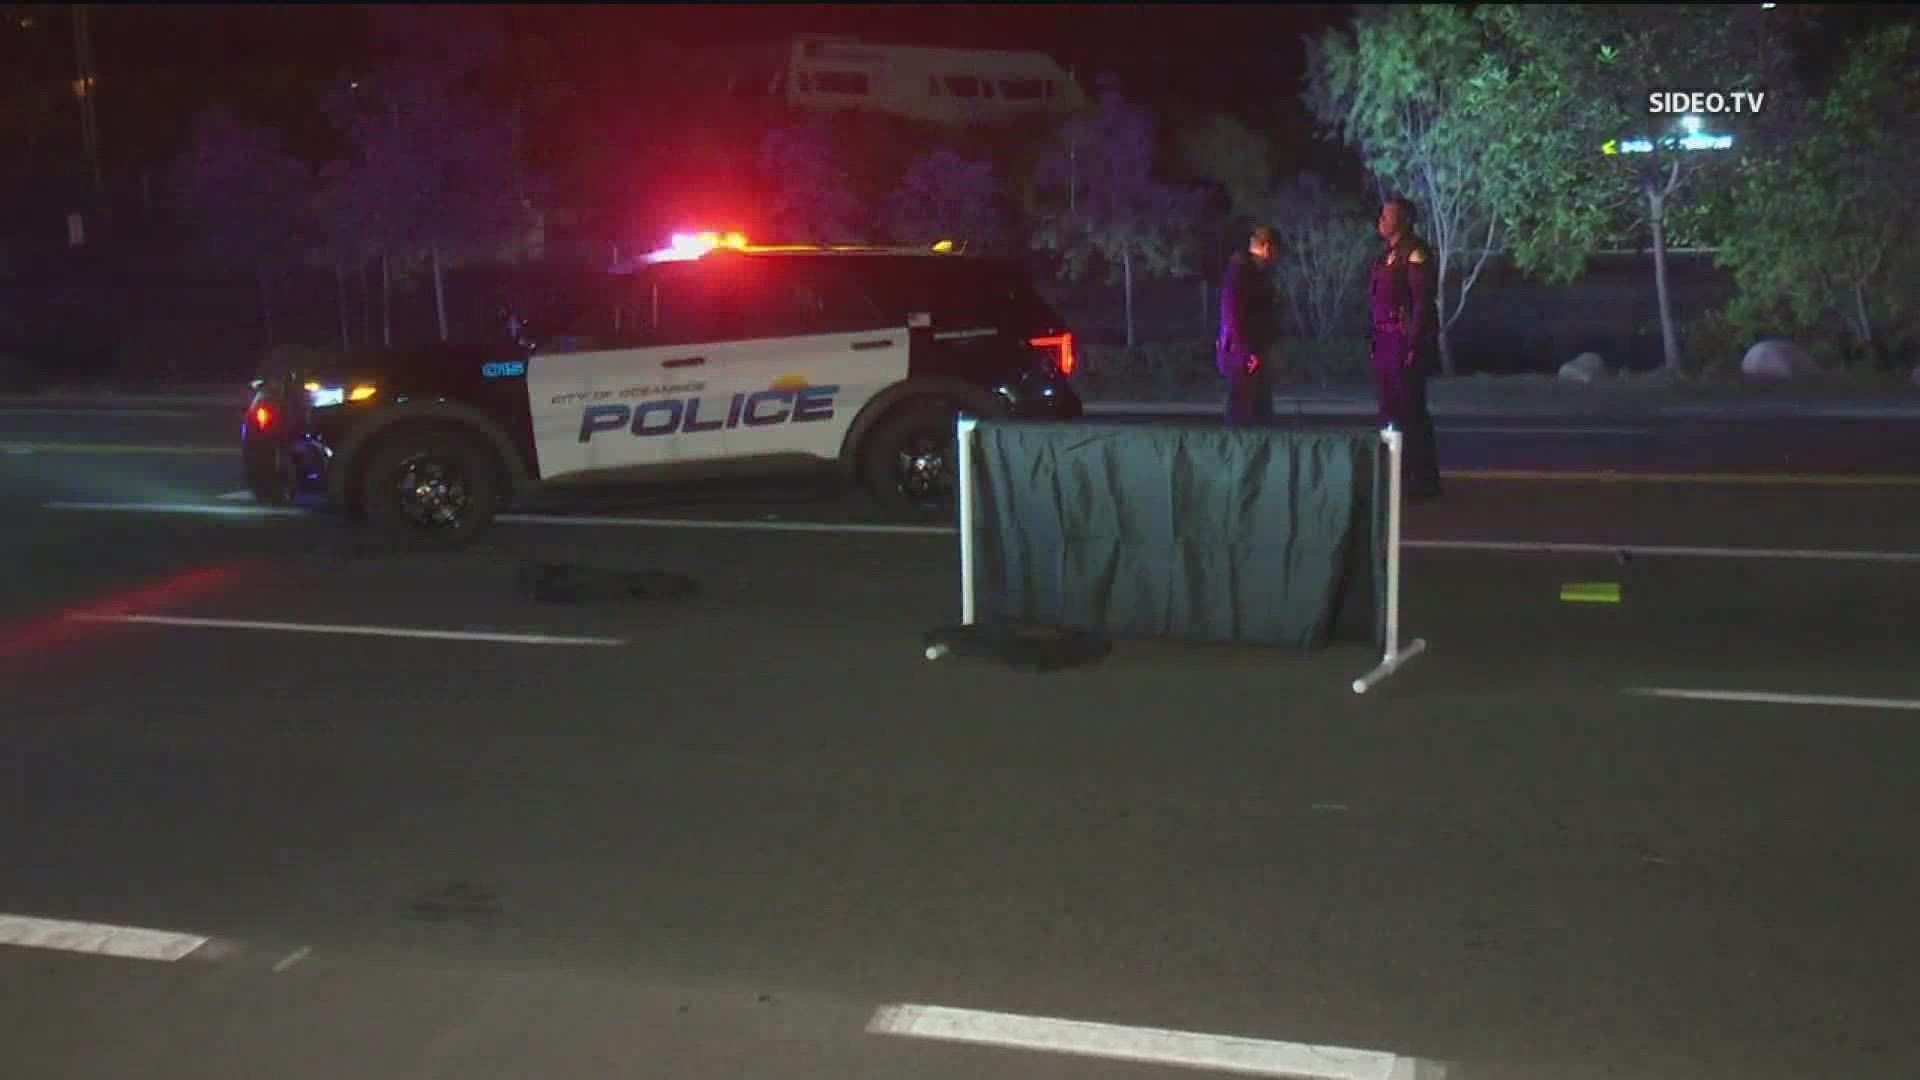 Two pedestrians were hit by a car and killed on Thanksgiving in Oceanside, according to police.